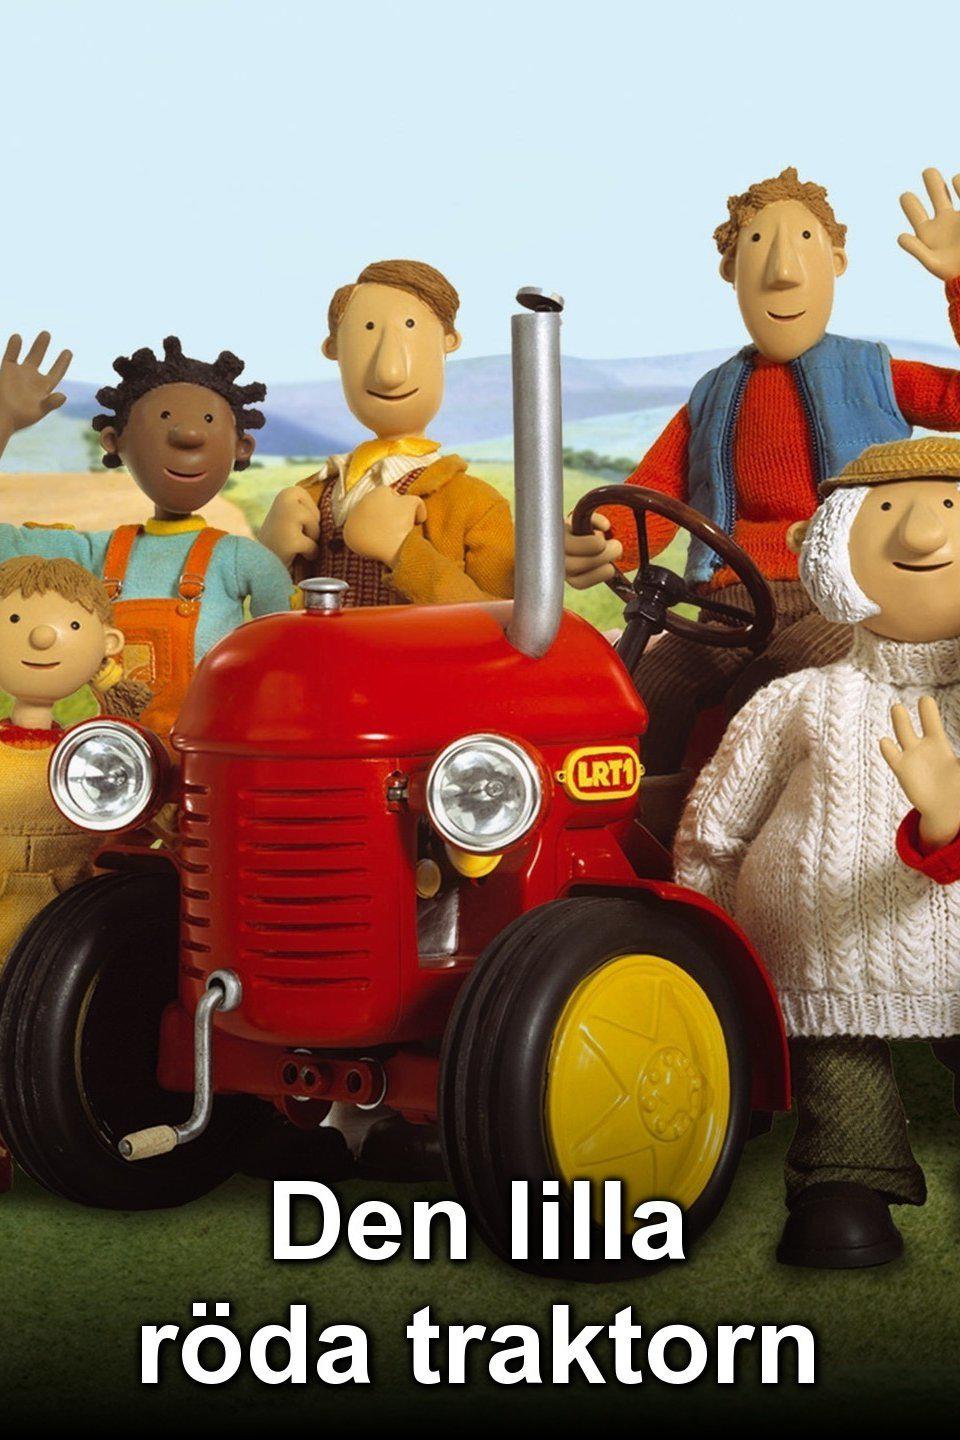 TV ratings for Little Red Tractor in Russia. BBC TV series